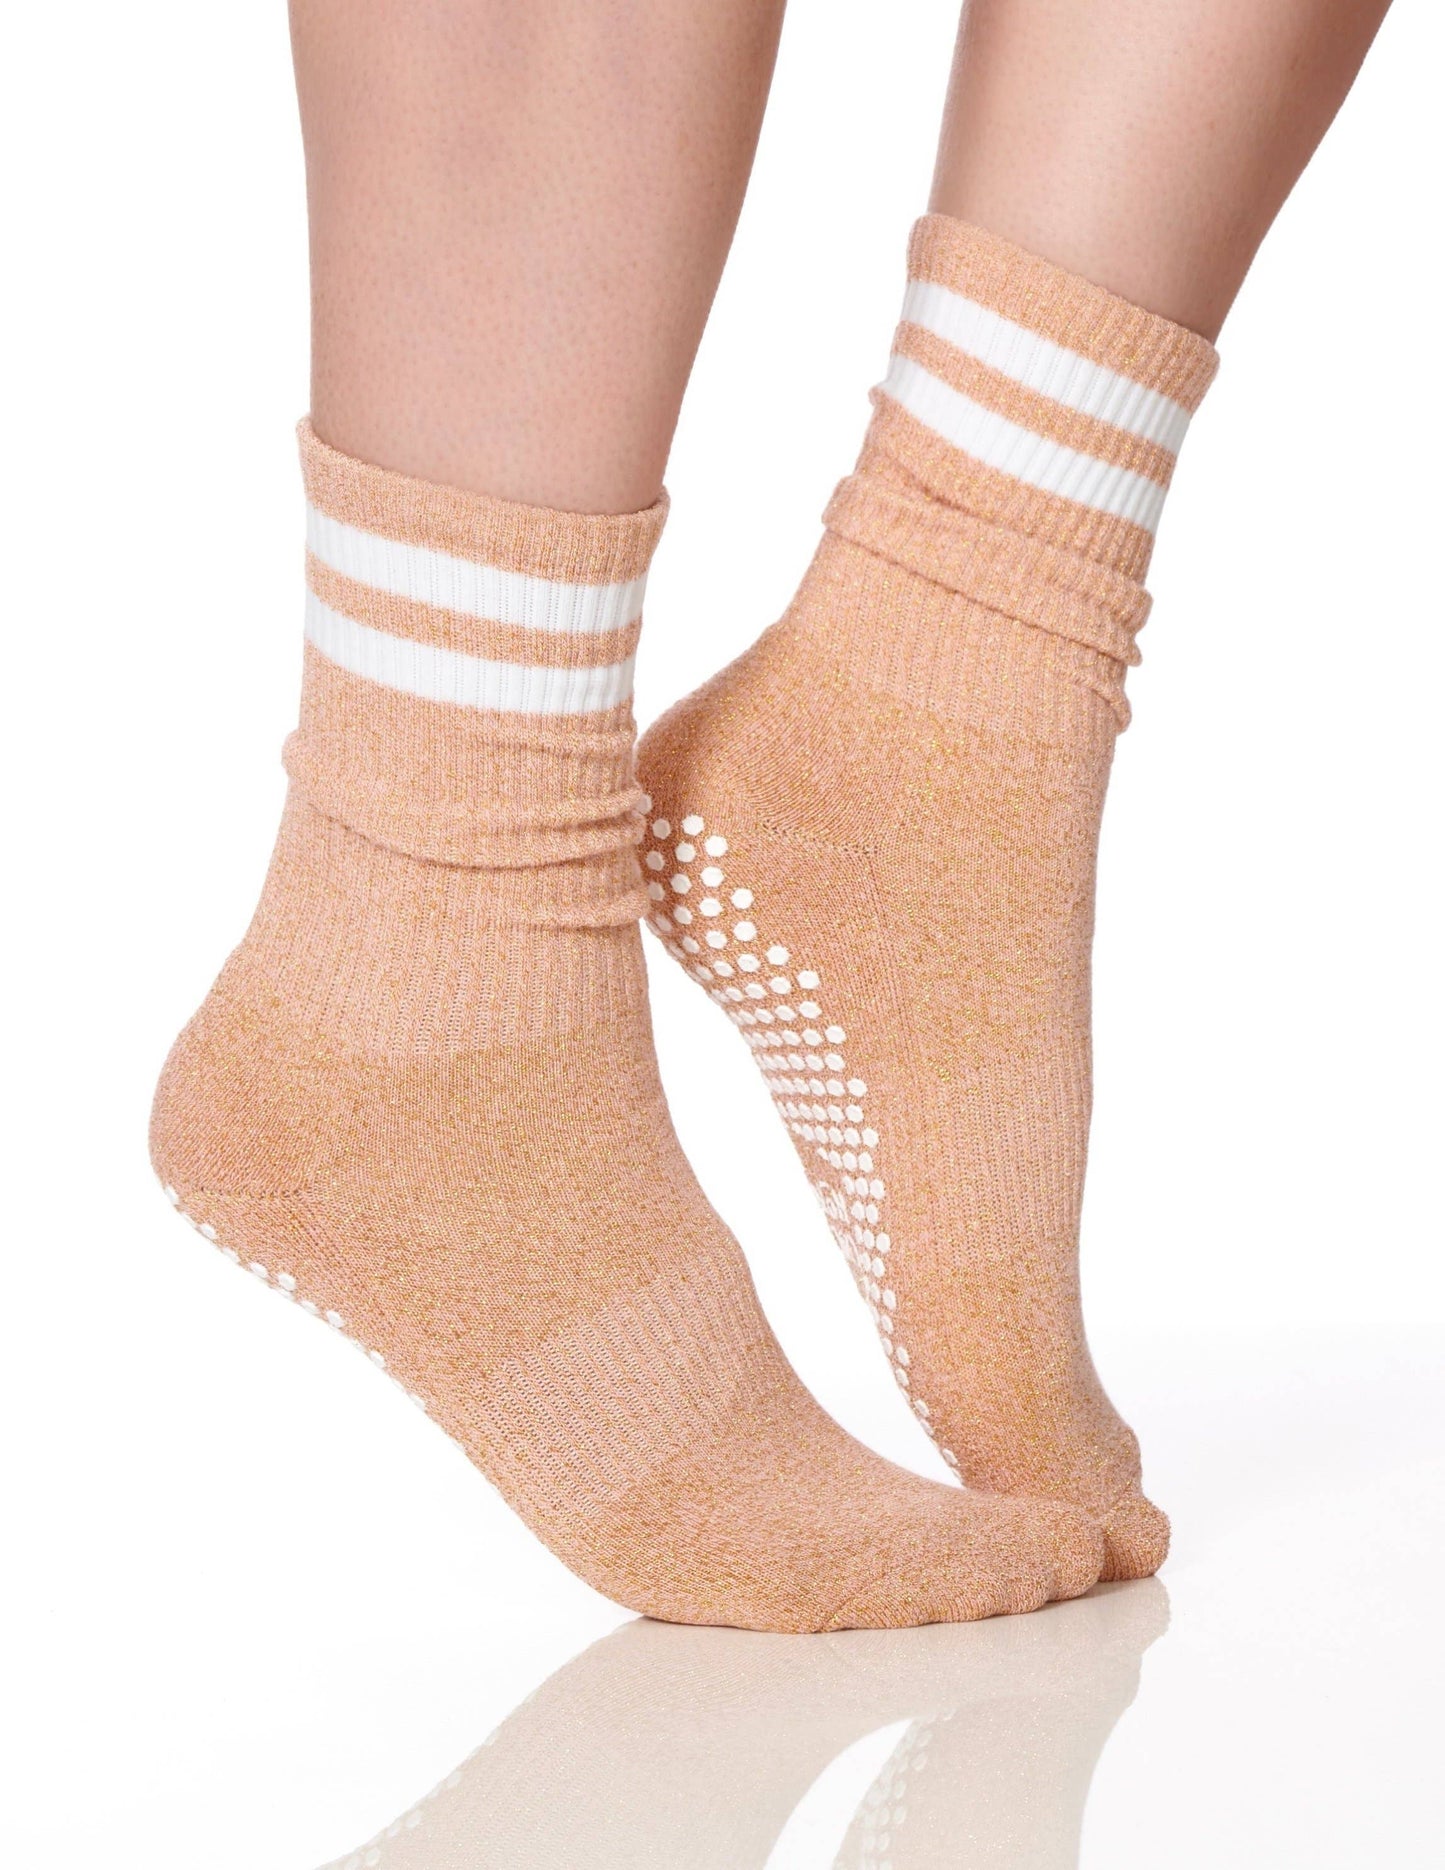 The Dad Sock Glittery Rose Gold, One Size